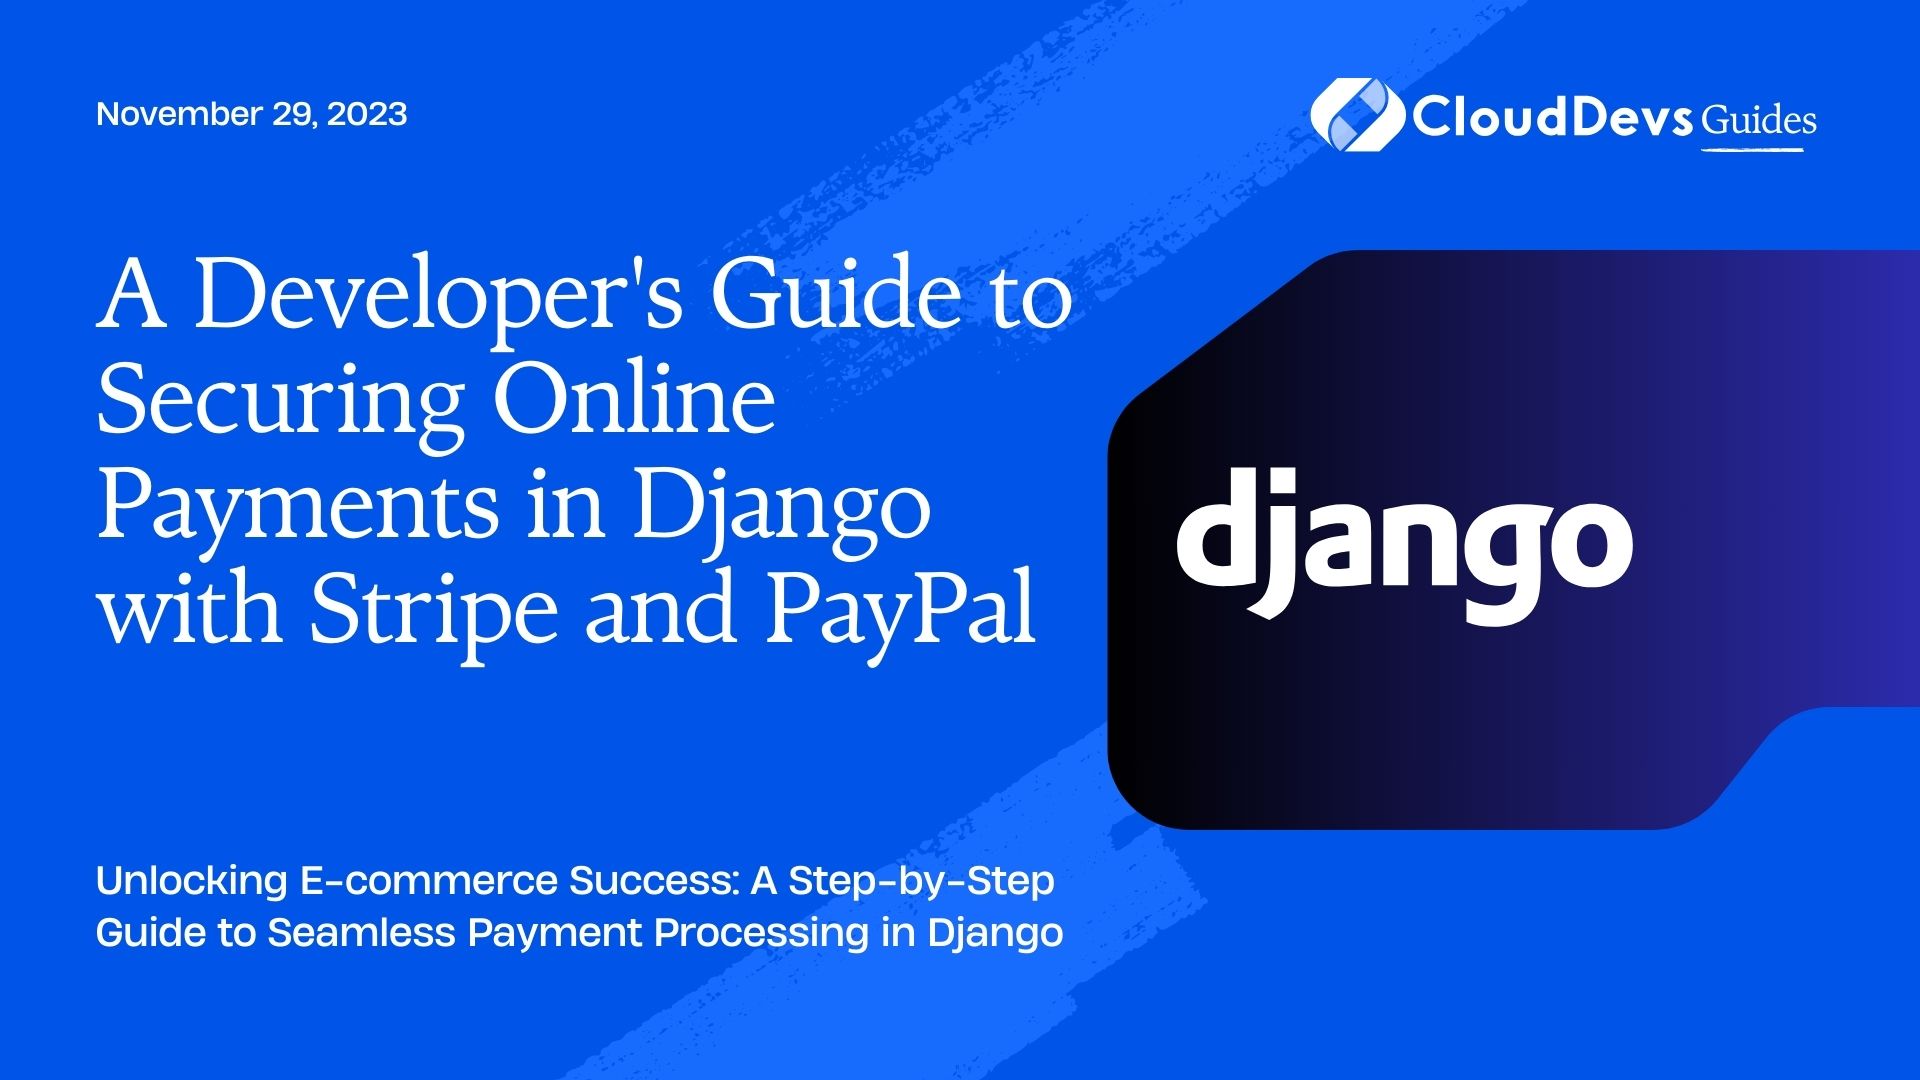 A Developer's Guide to Securing Online Payments in Django with Stripe and PayPal